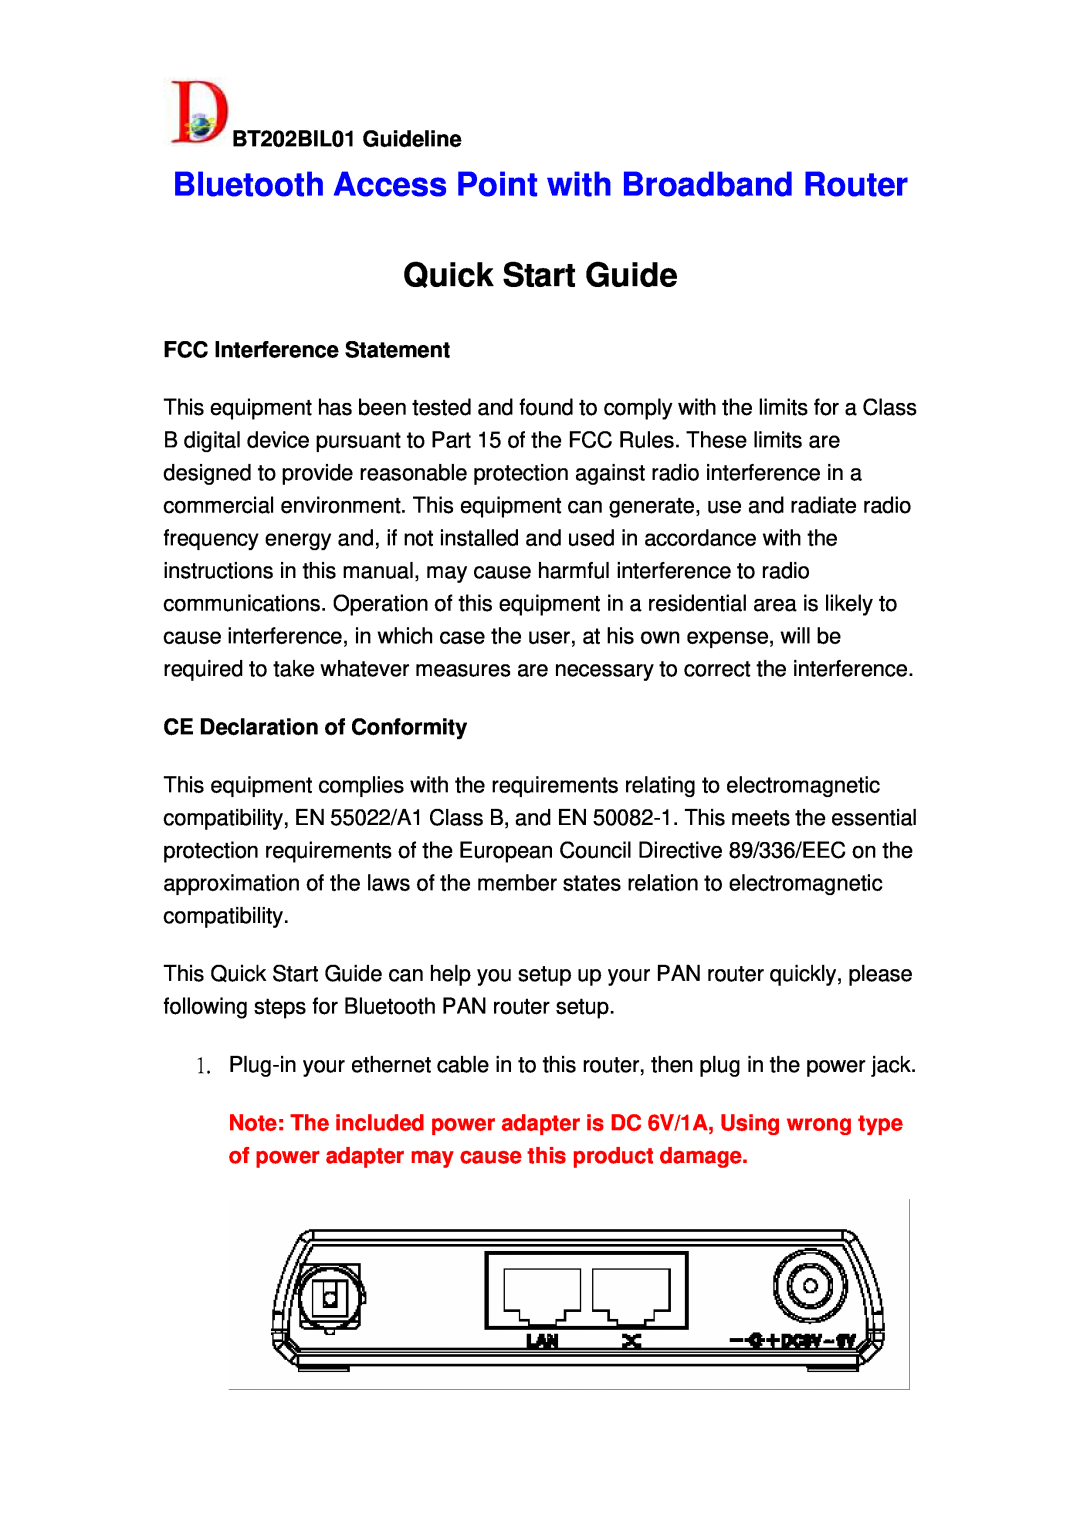 Olicom quick start BT202BIL01 Guideline, FCC Interference Statement, CE Declaration of Conformity, Quick Start Guide 